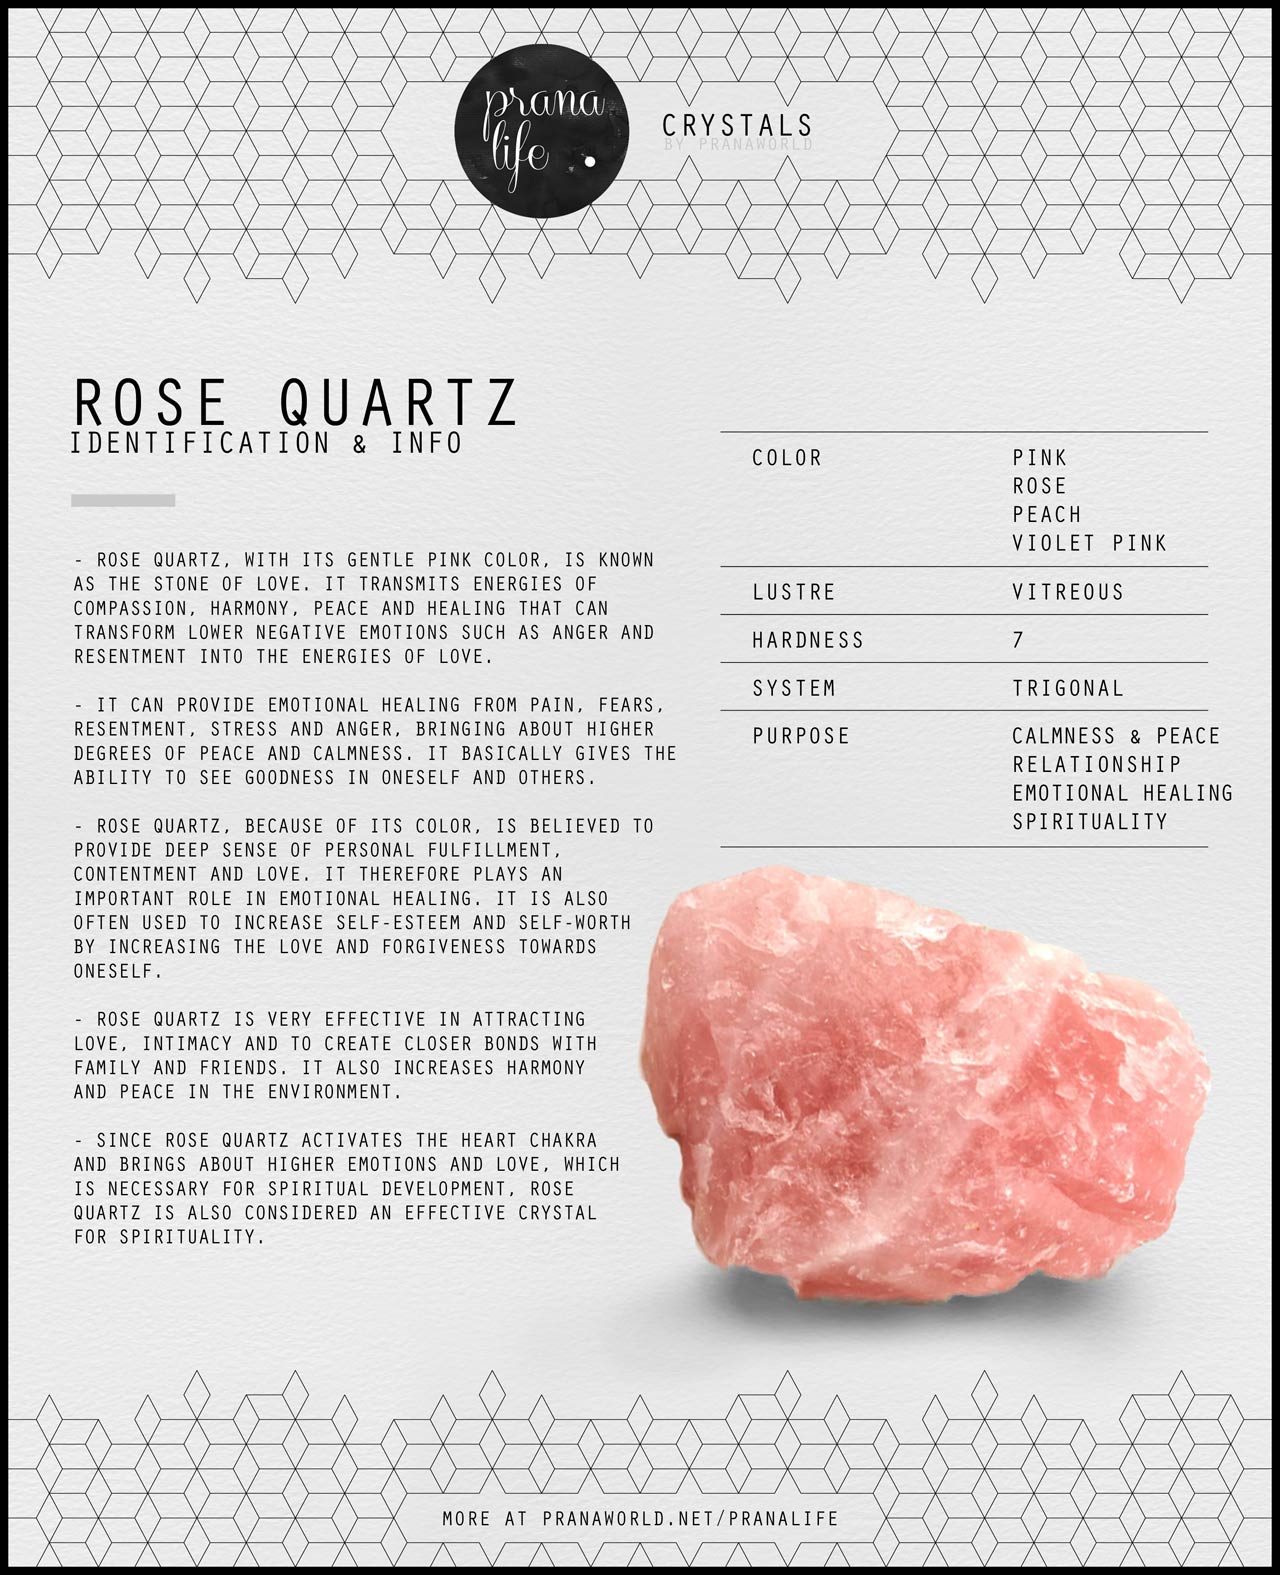 meaning and properties of rose quartz